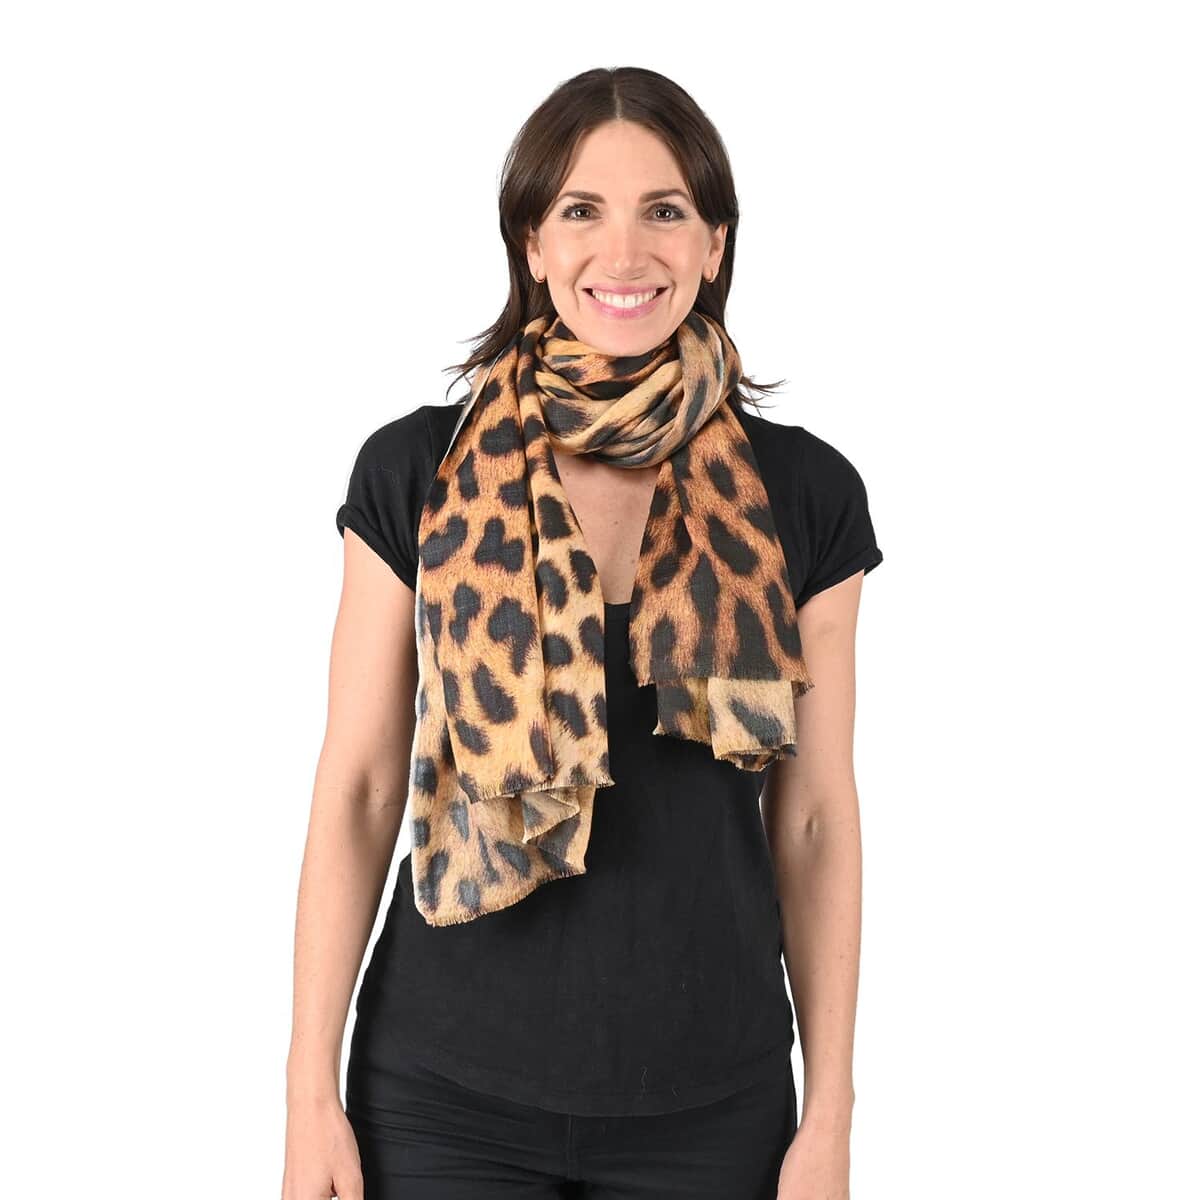 TAMSY Brown Leopard Printed Cashmere Wool Scarf (28"x78") image number 1